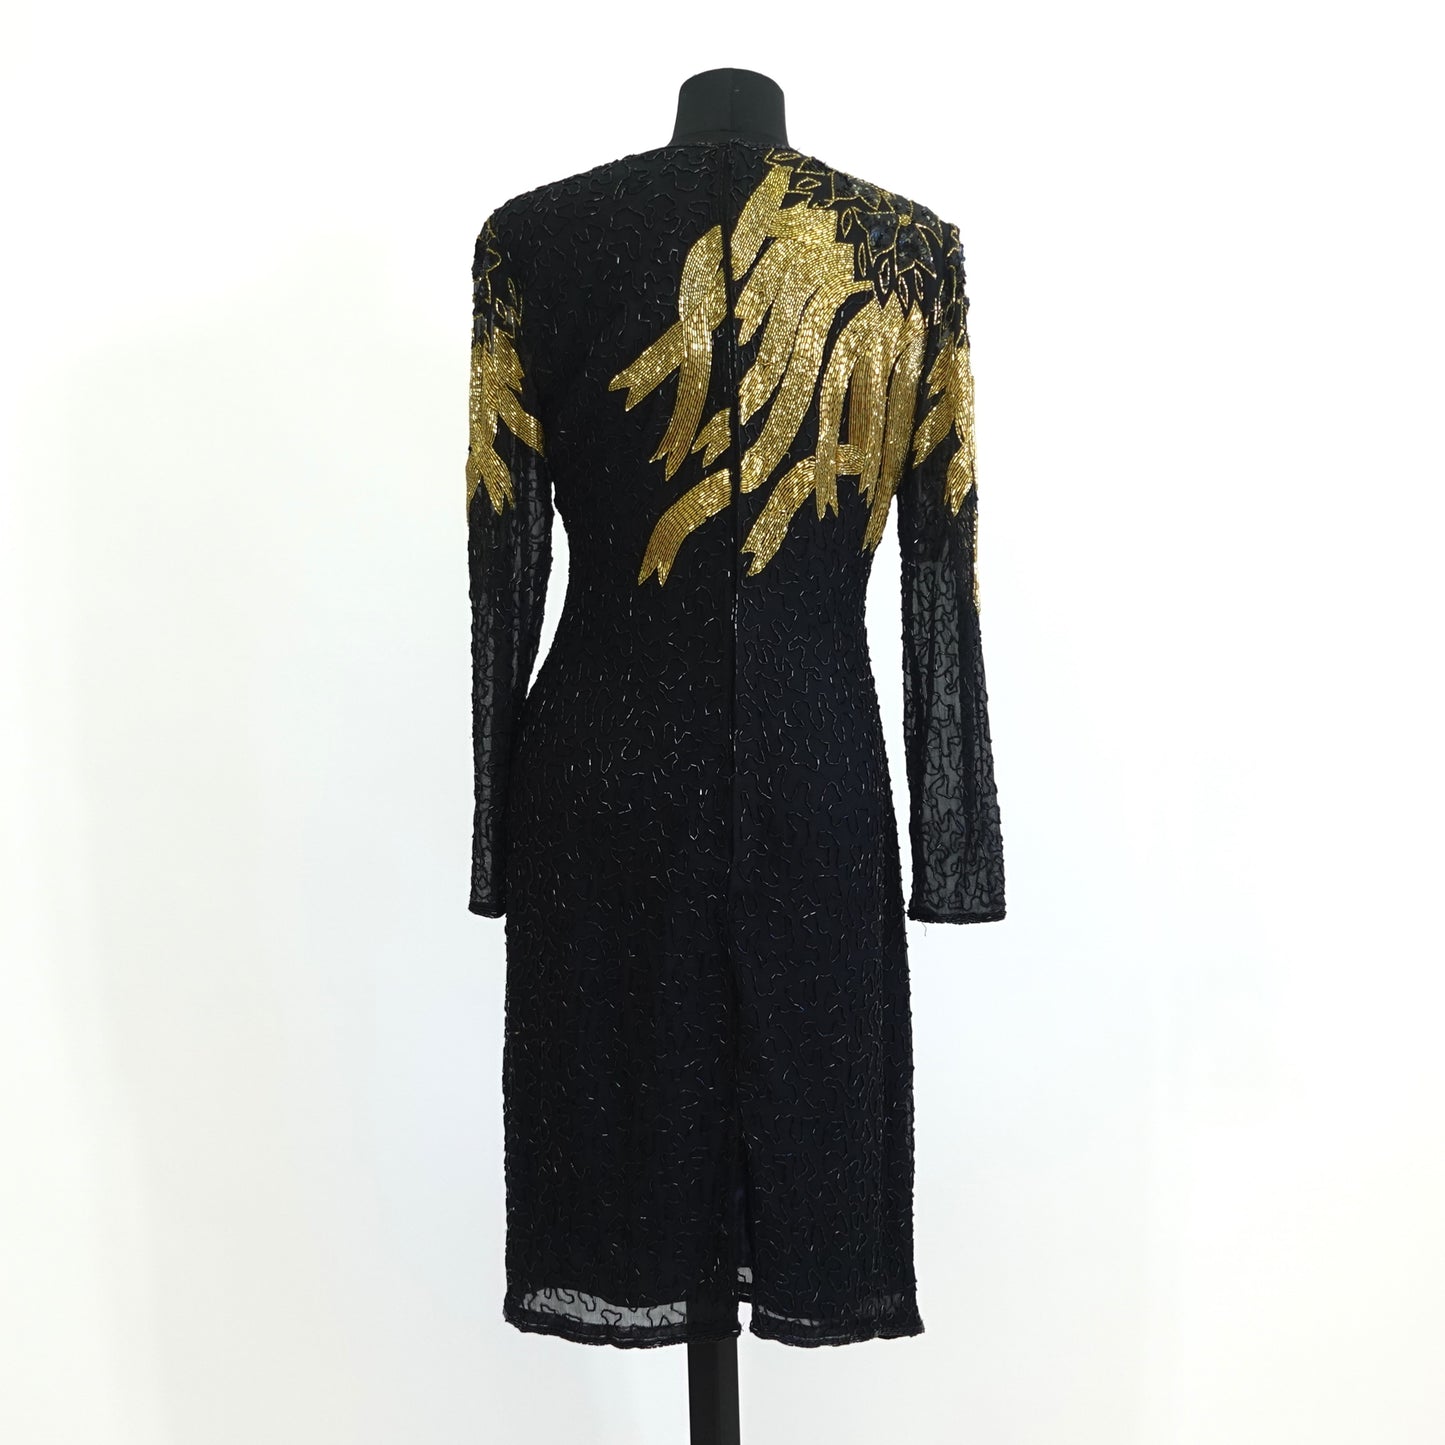 Vintage Black and Gold Beaded Pencil Dress